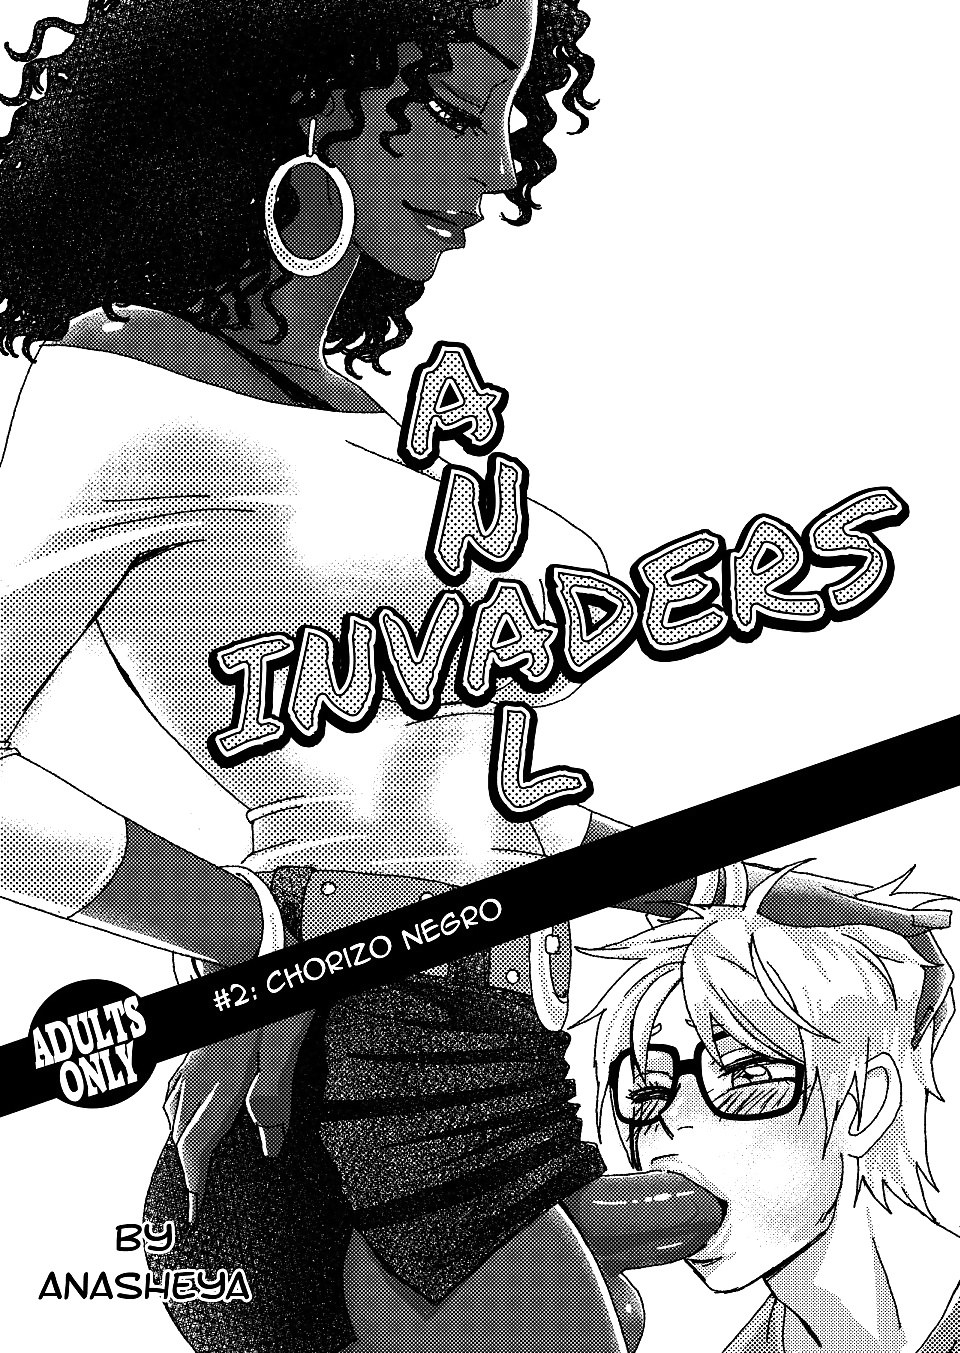 Anal invaders 2 #31975682